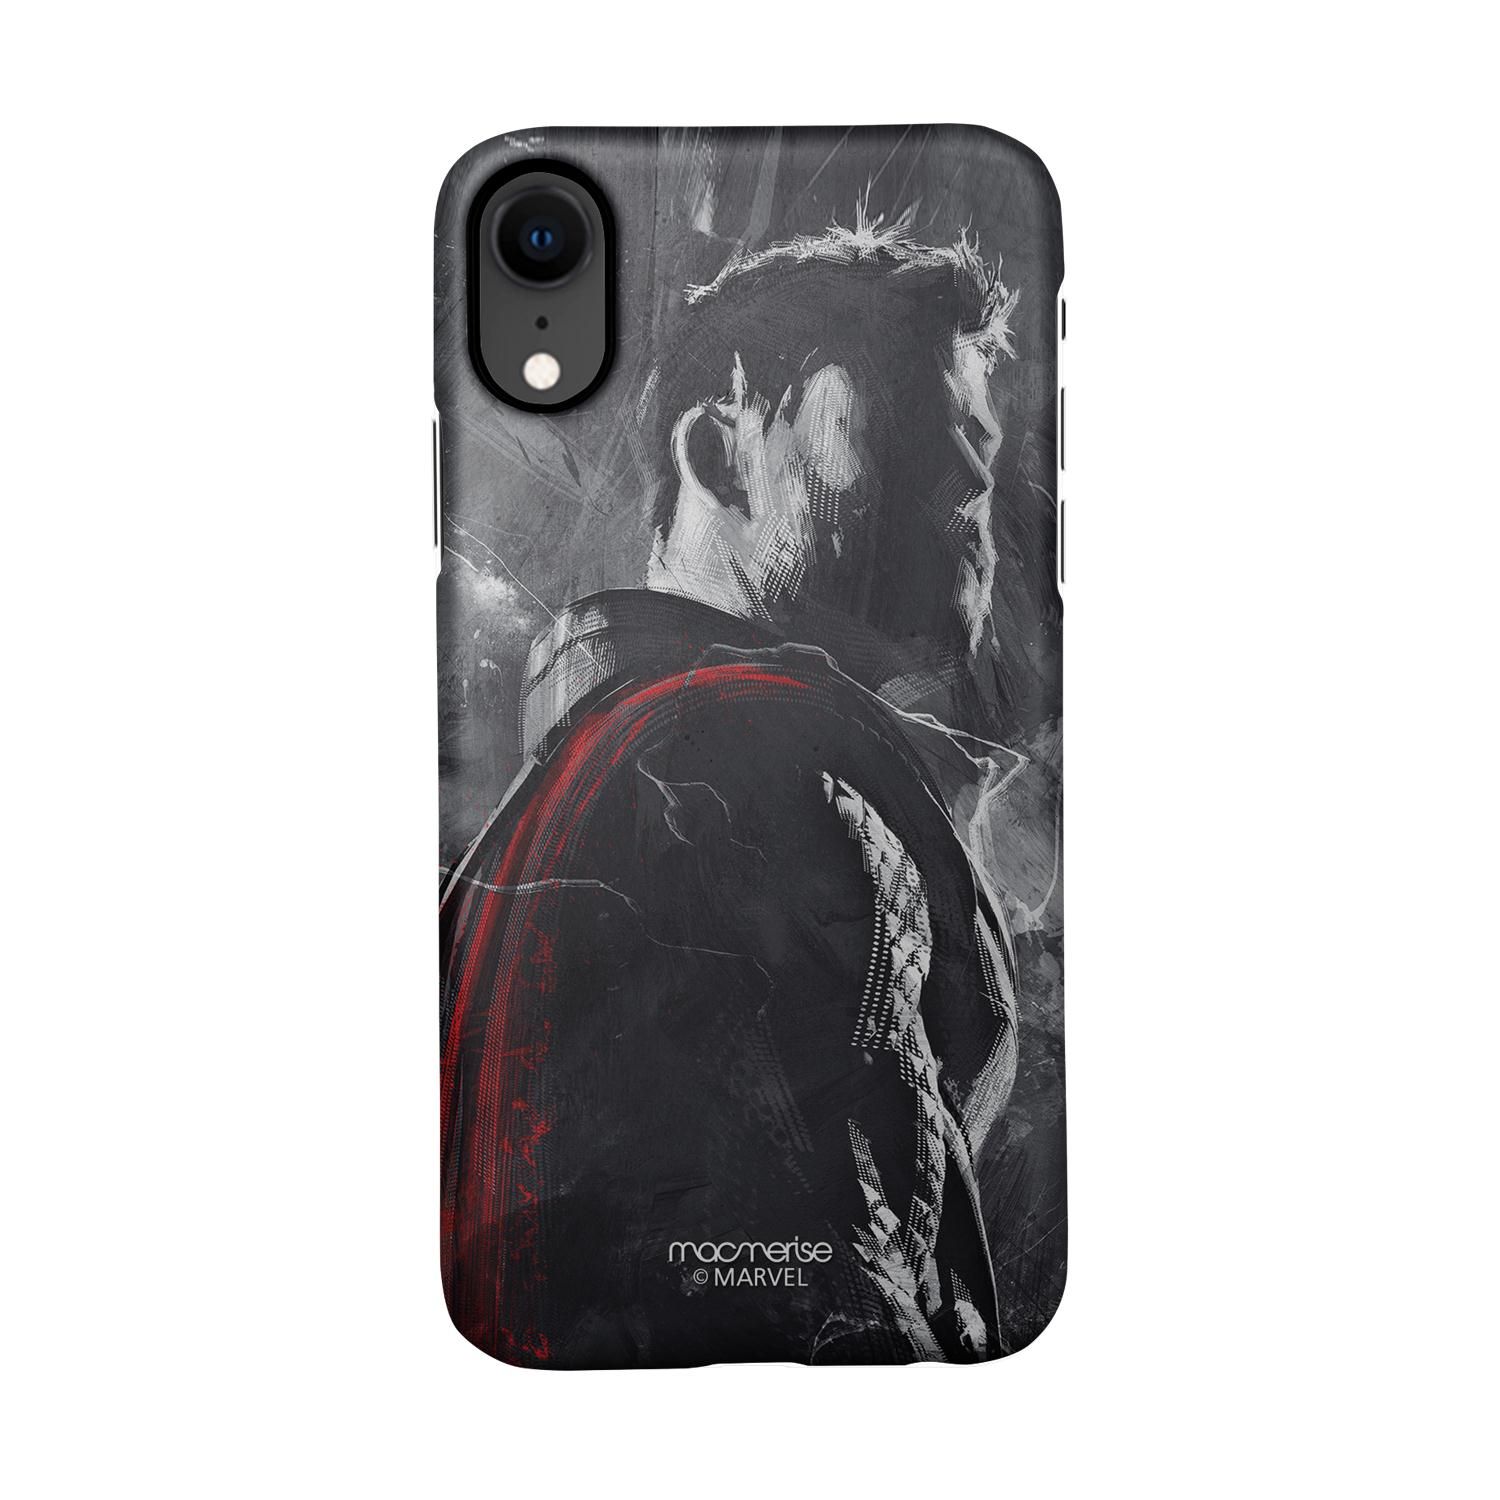 Buy Charcoal Art Thor - Sleek Phone Case for iPhone XR Online